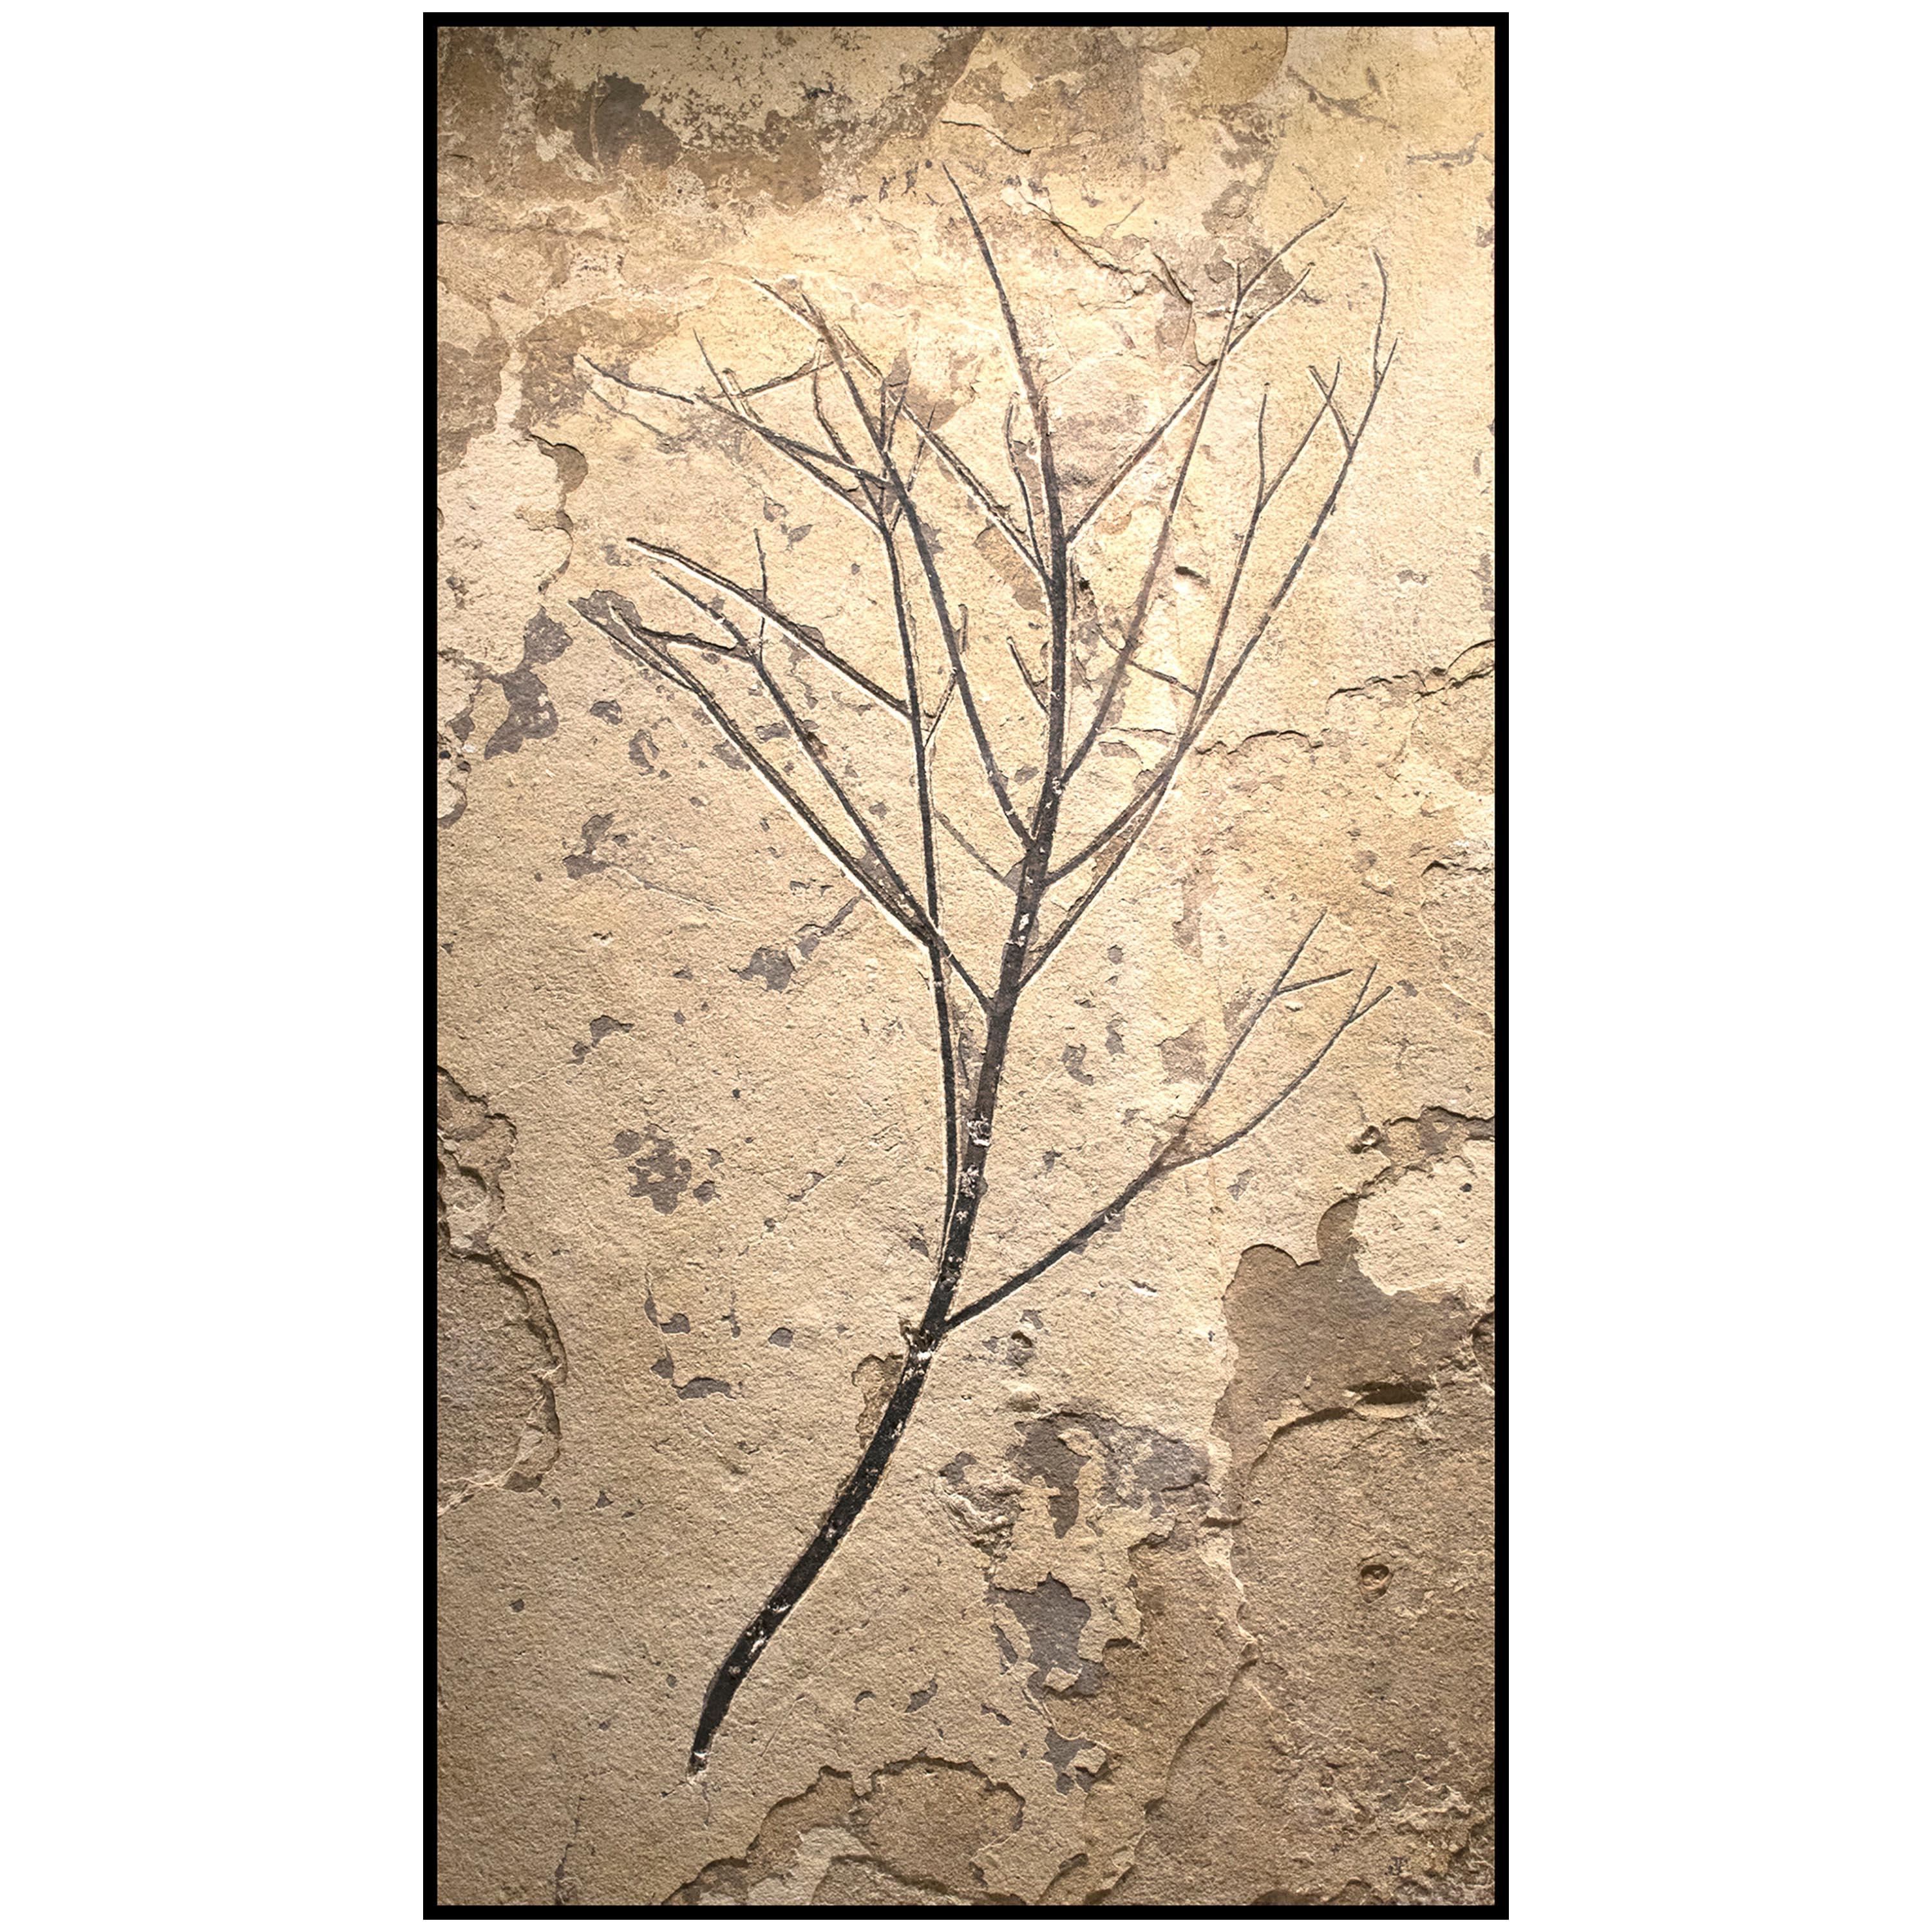 50 Million Year Old Eocene Era Fossil Branch Mural in Stone, from Wyoming